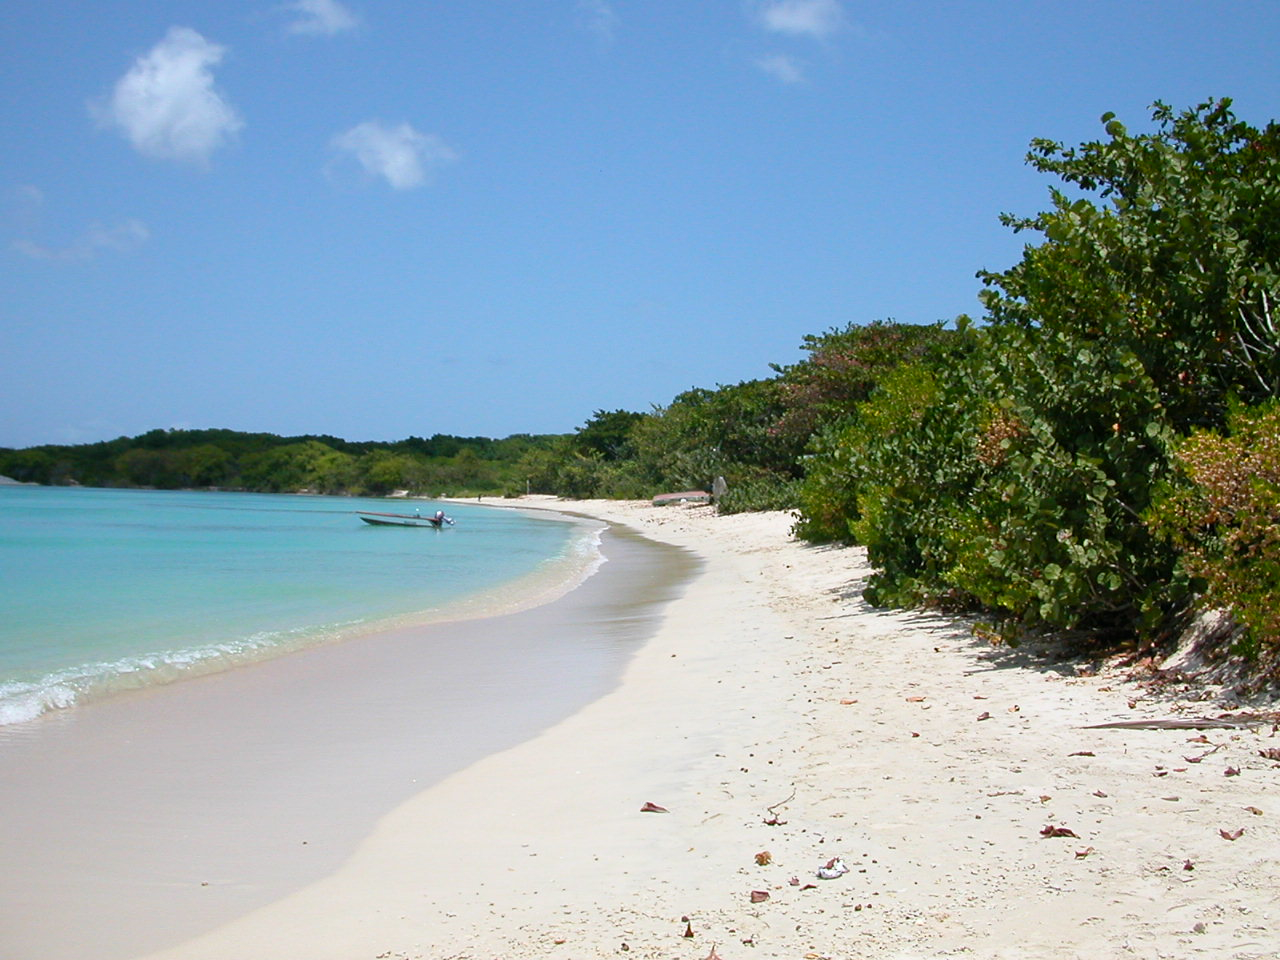 On carriacou this is the nicest beach.